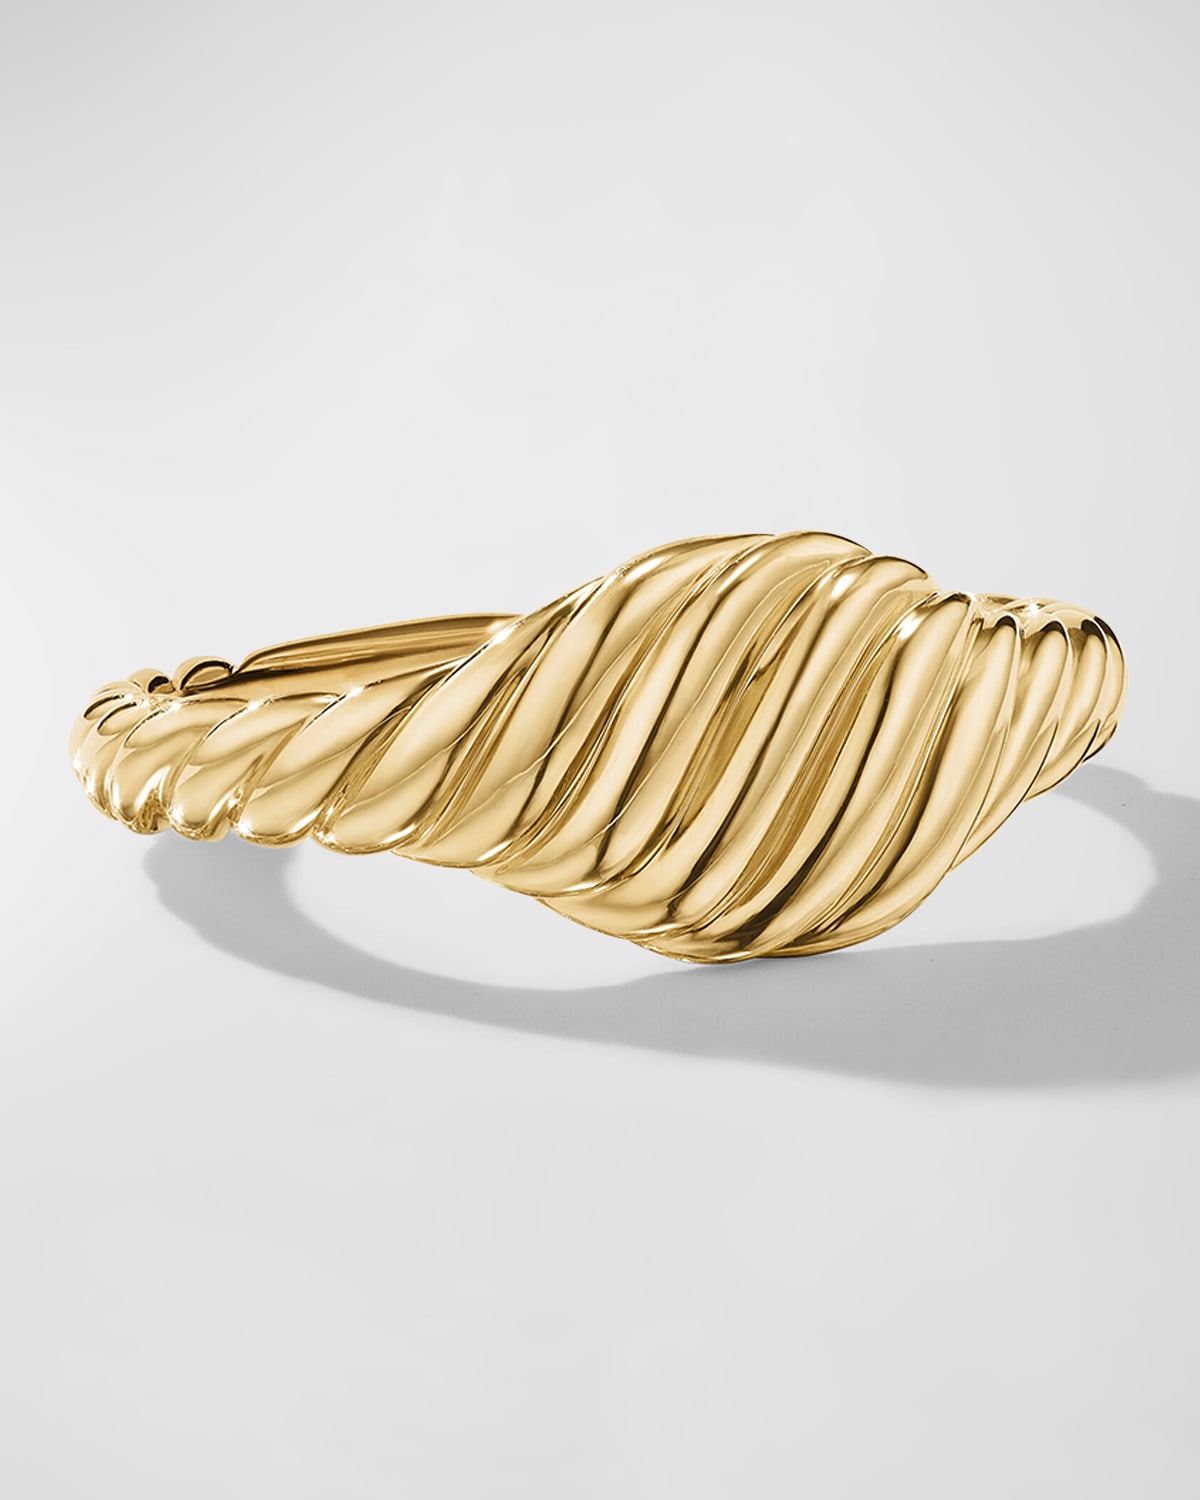 DAVID YURMAN SCULPTED CABLE PINKY RING IN 18K GOLD, 7MM